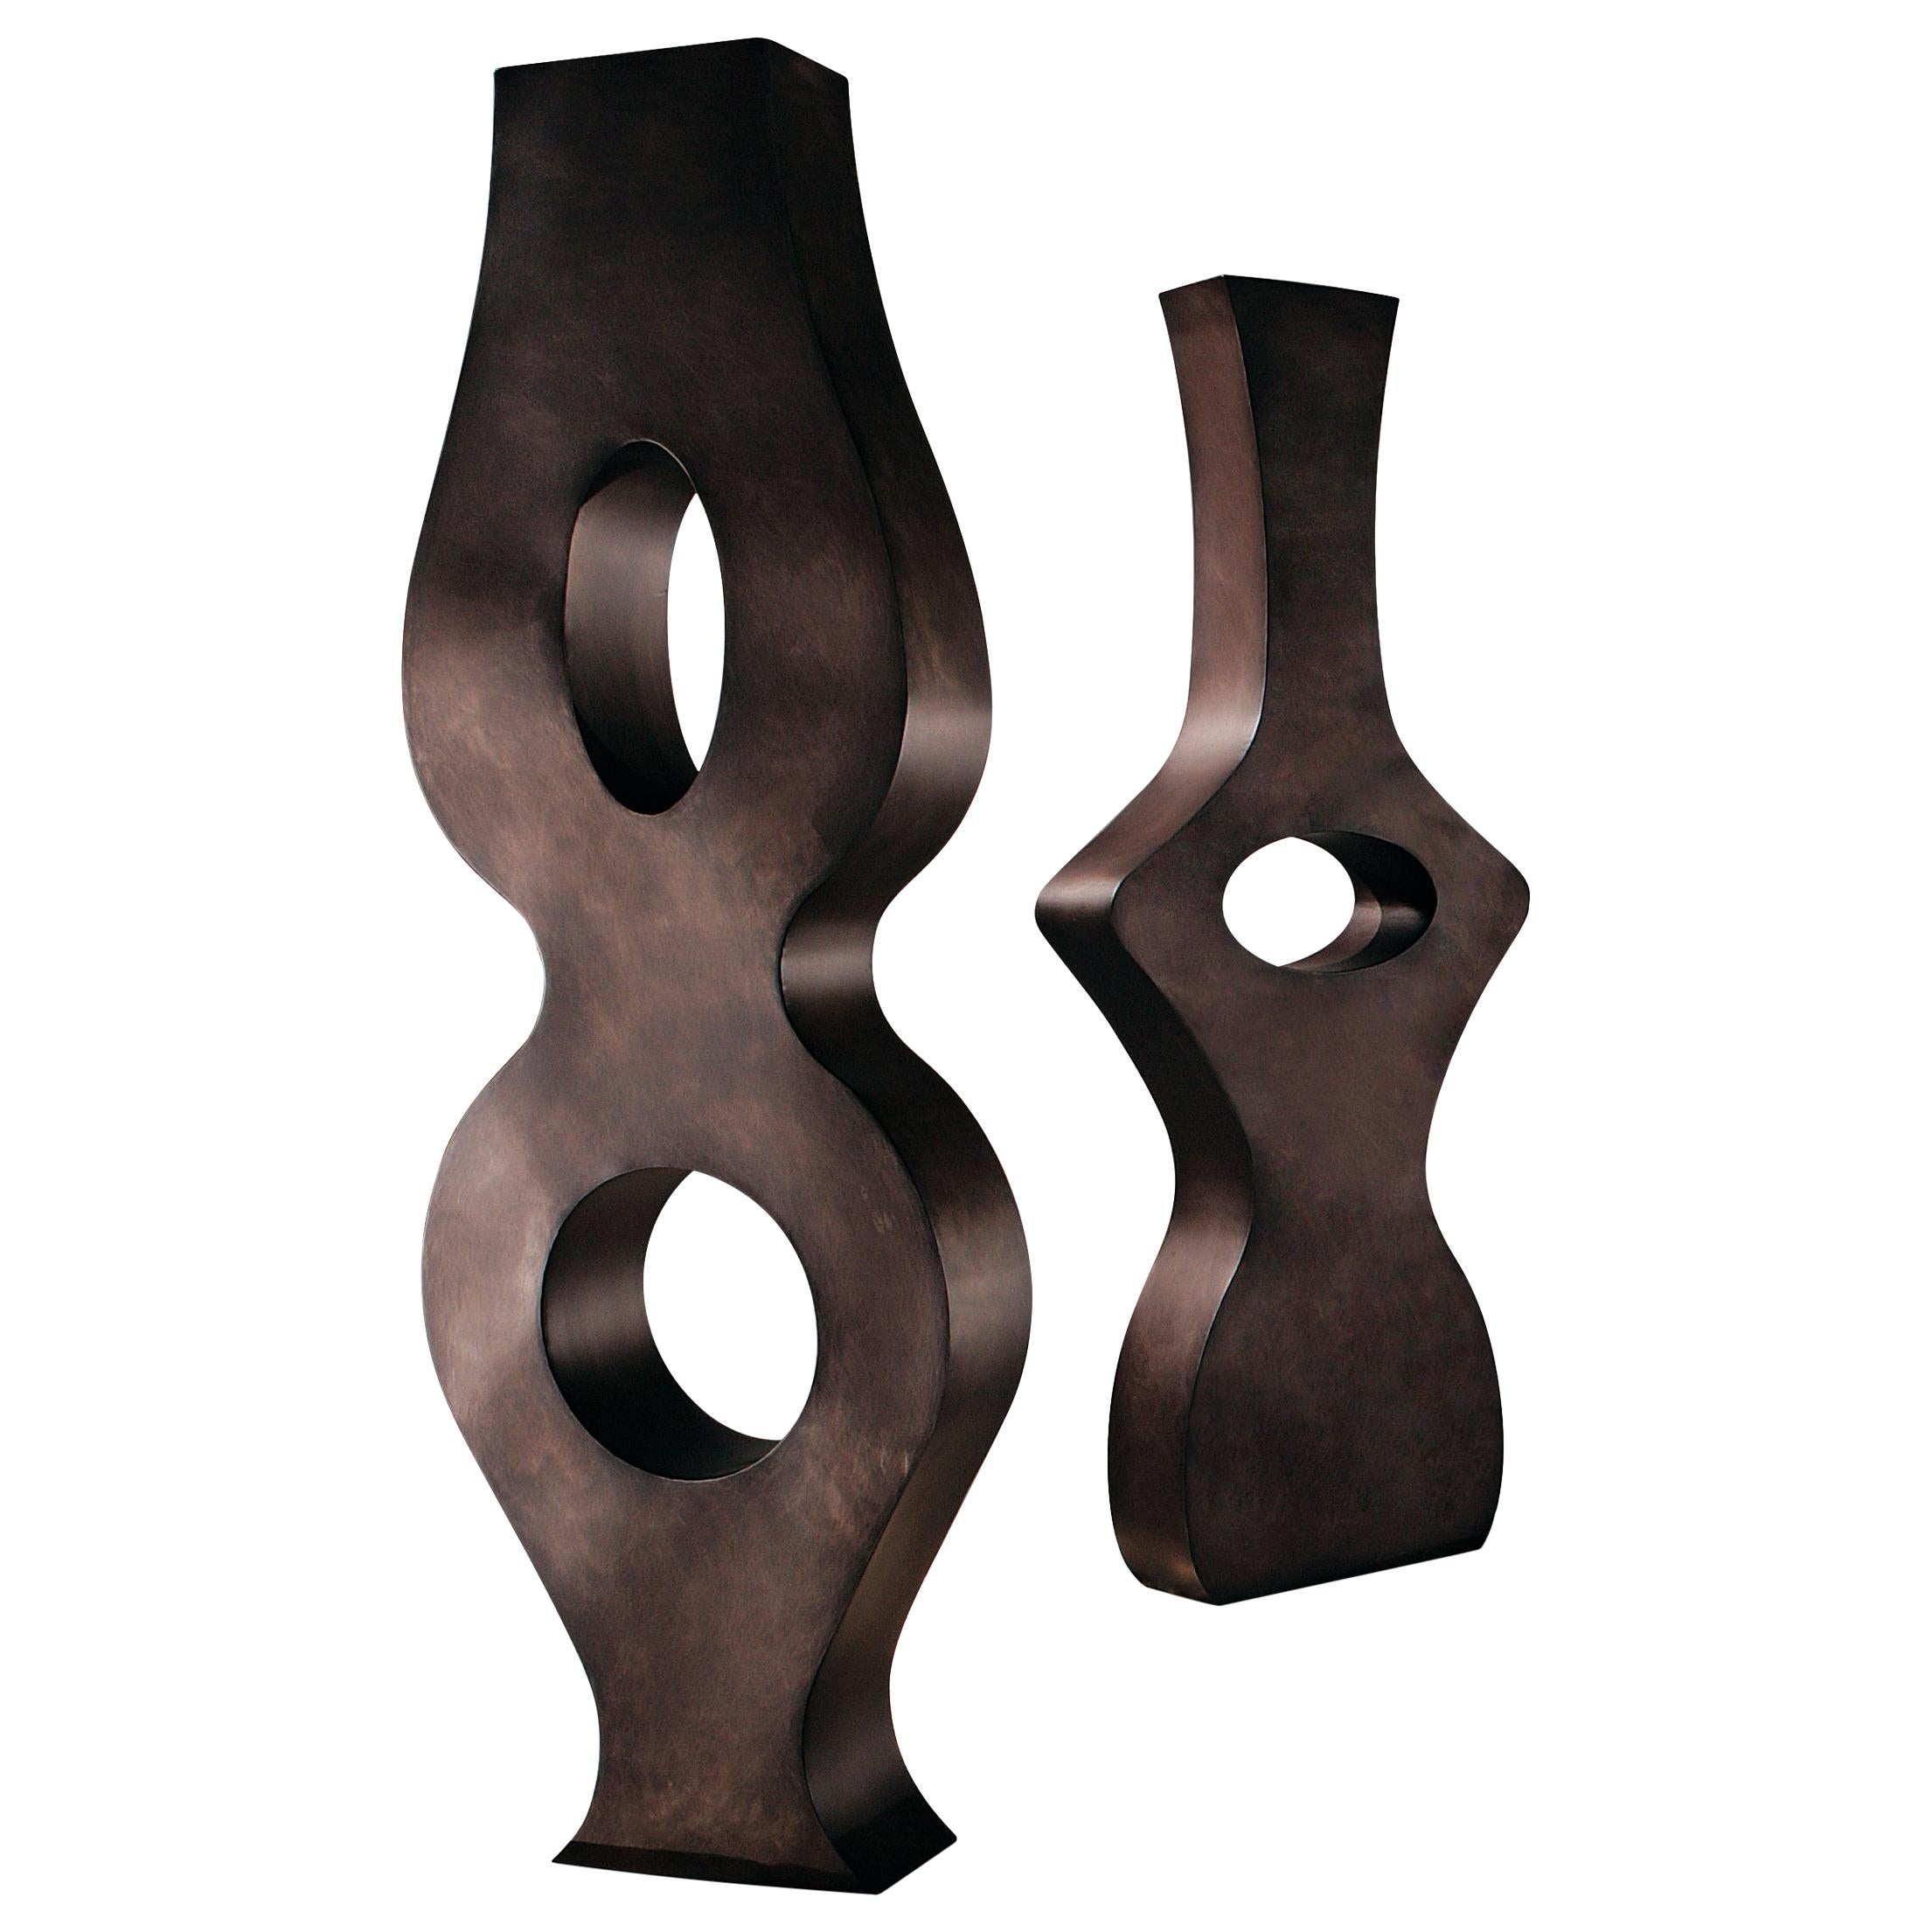 DeCastelli DC099 Tristan & Isotte Sculpture in Stainless Steel by Stefano Dussin For Sale